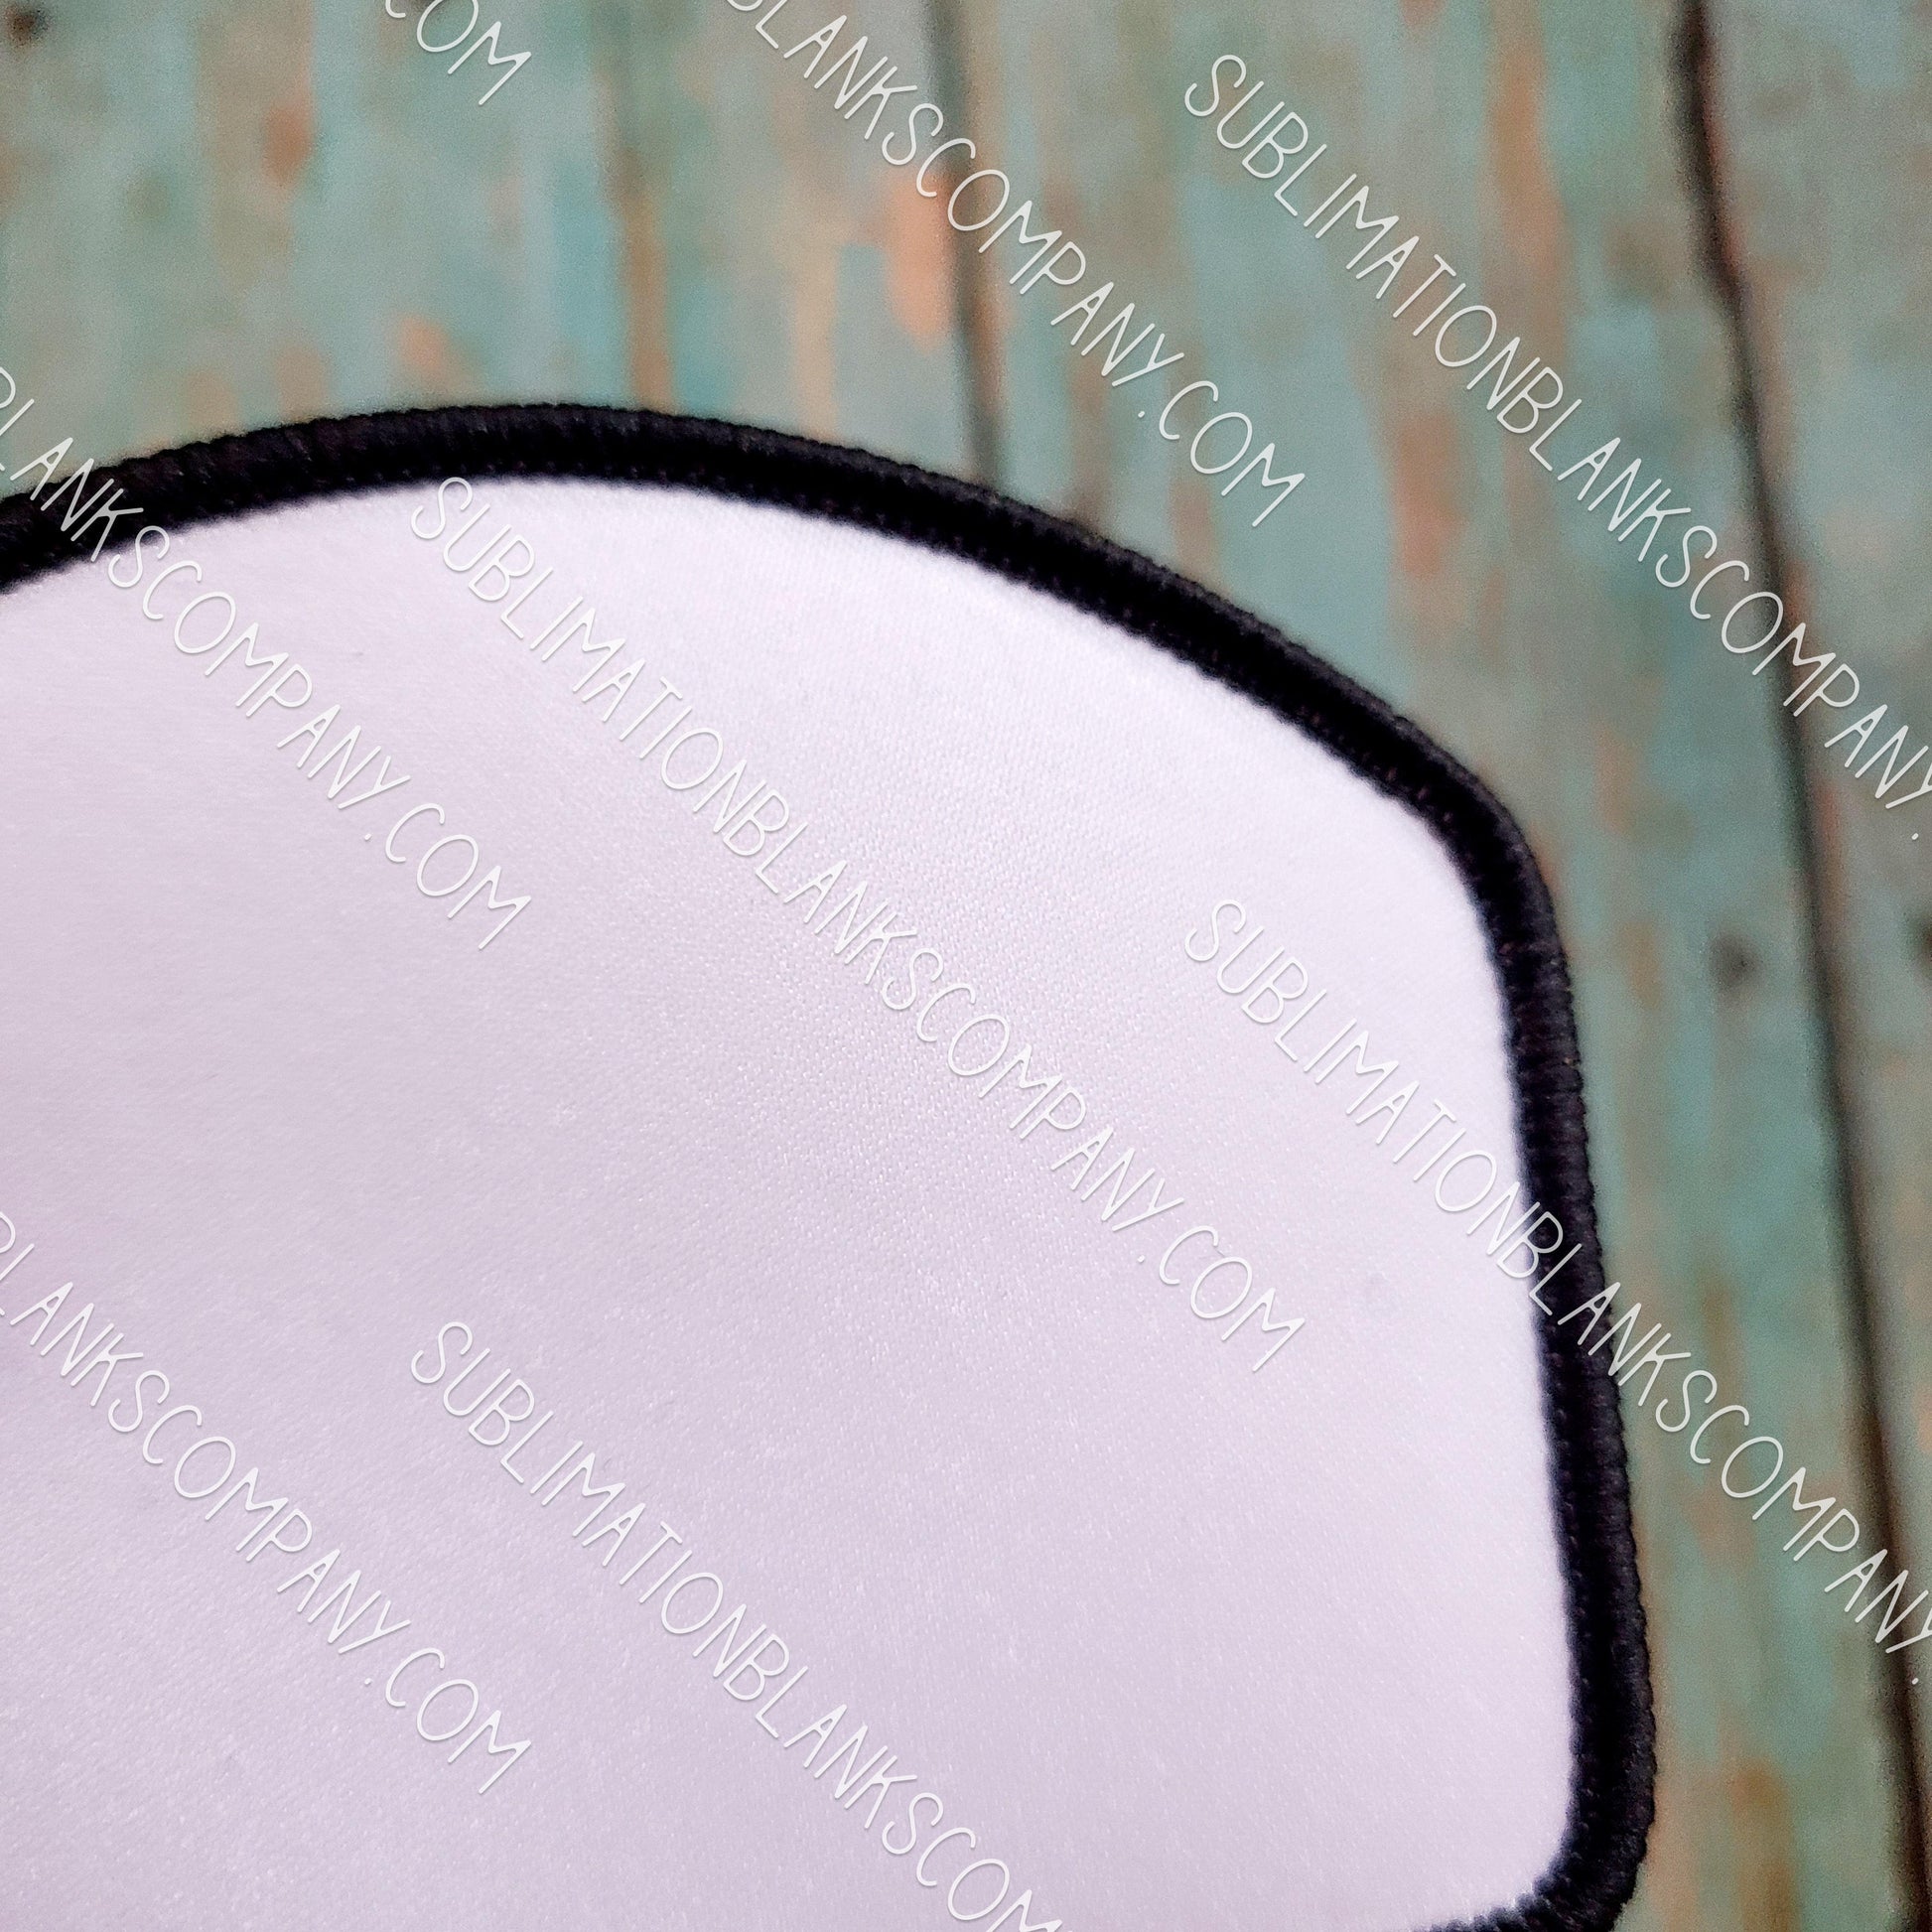 Round Blank Patch 3-1/2 Black Background & Black Border  Home embroidery  machine, Embroidery blanks, Embroidery supplies